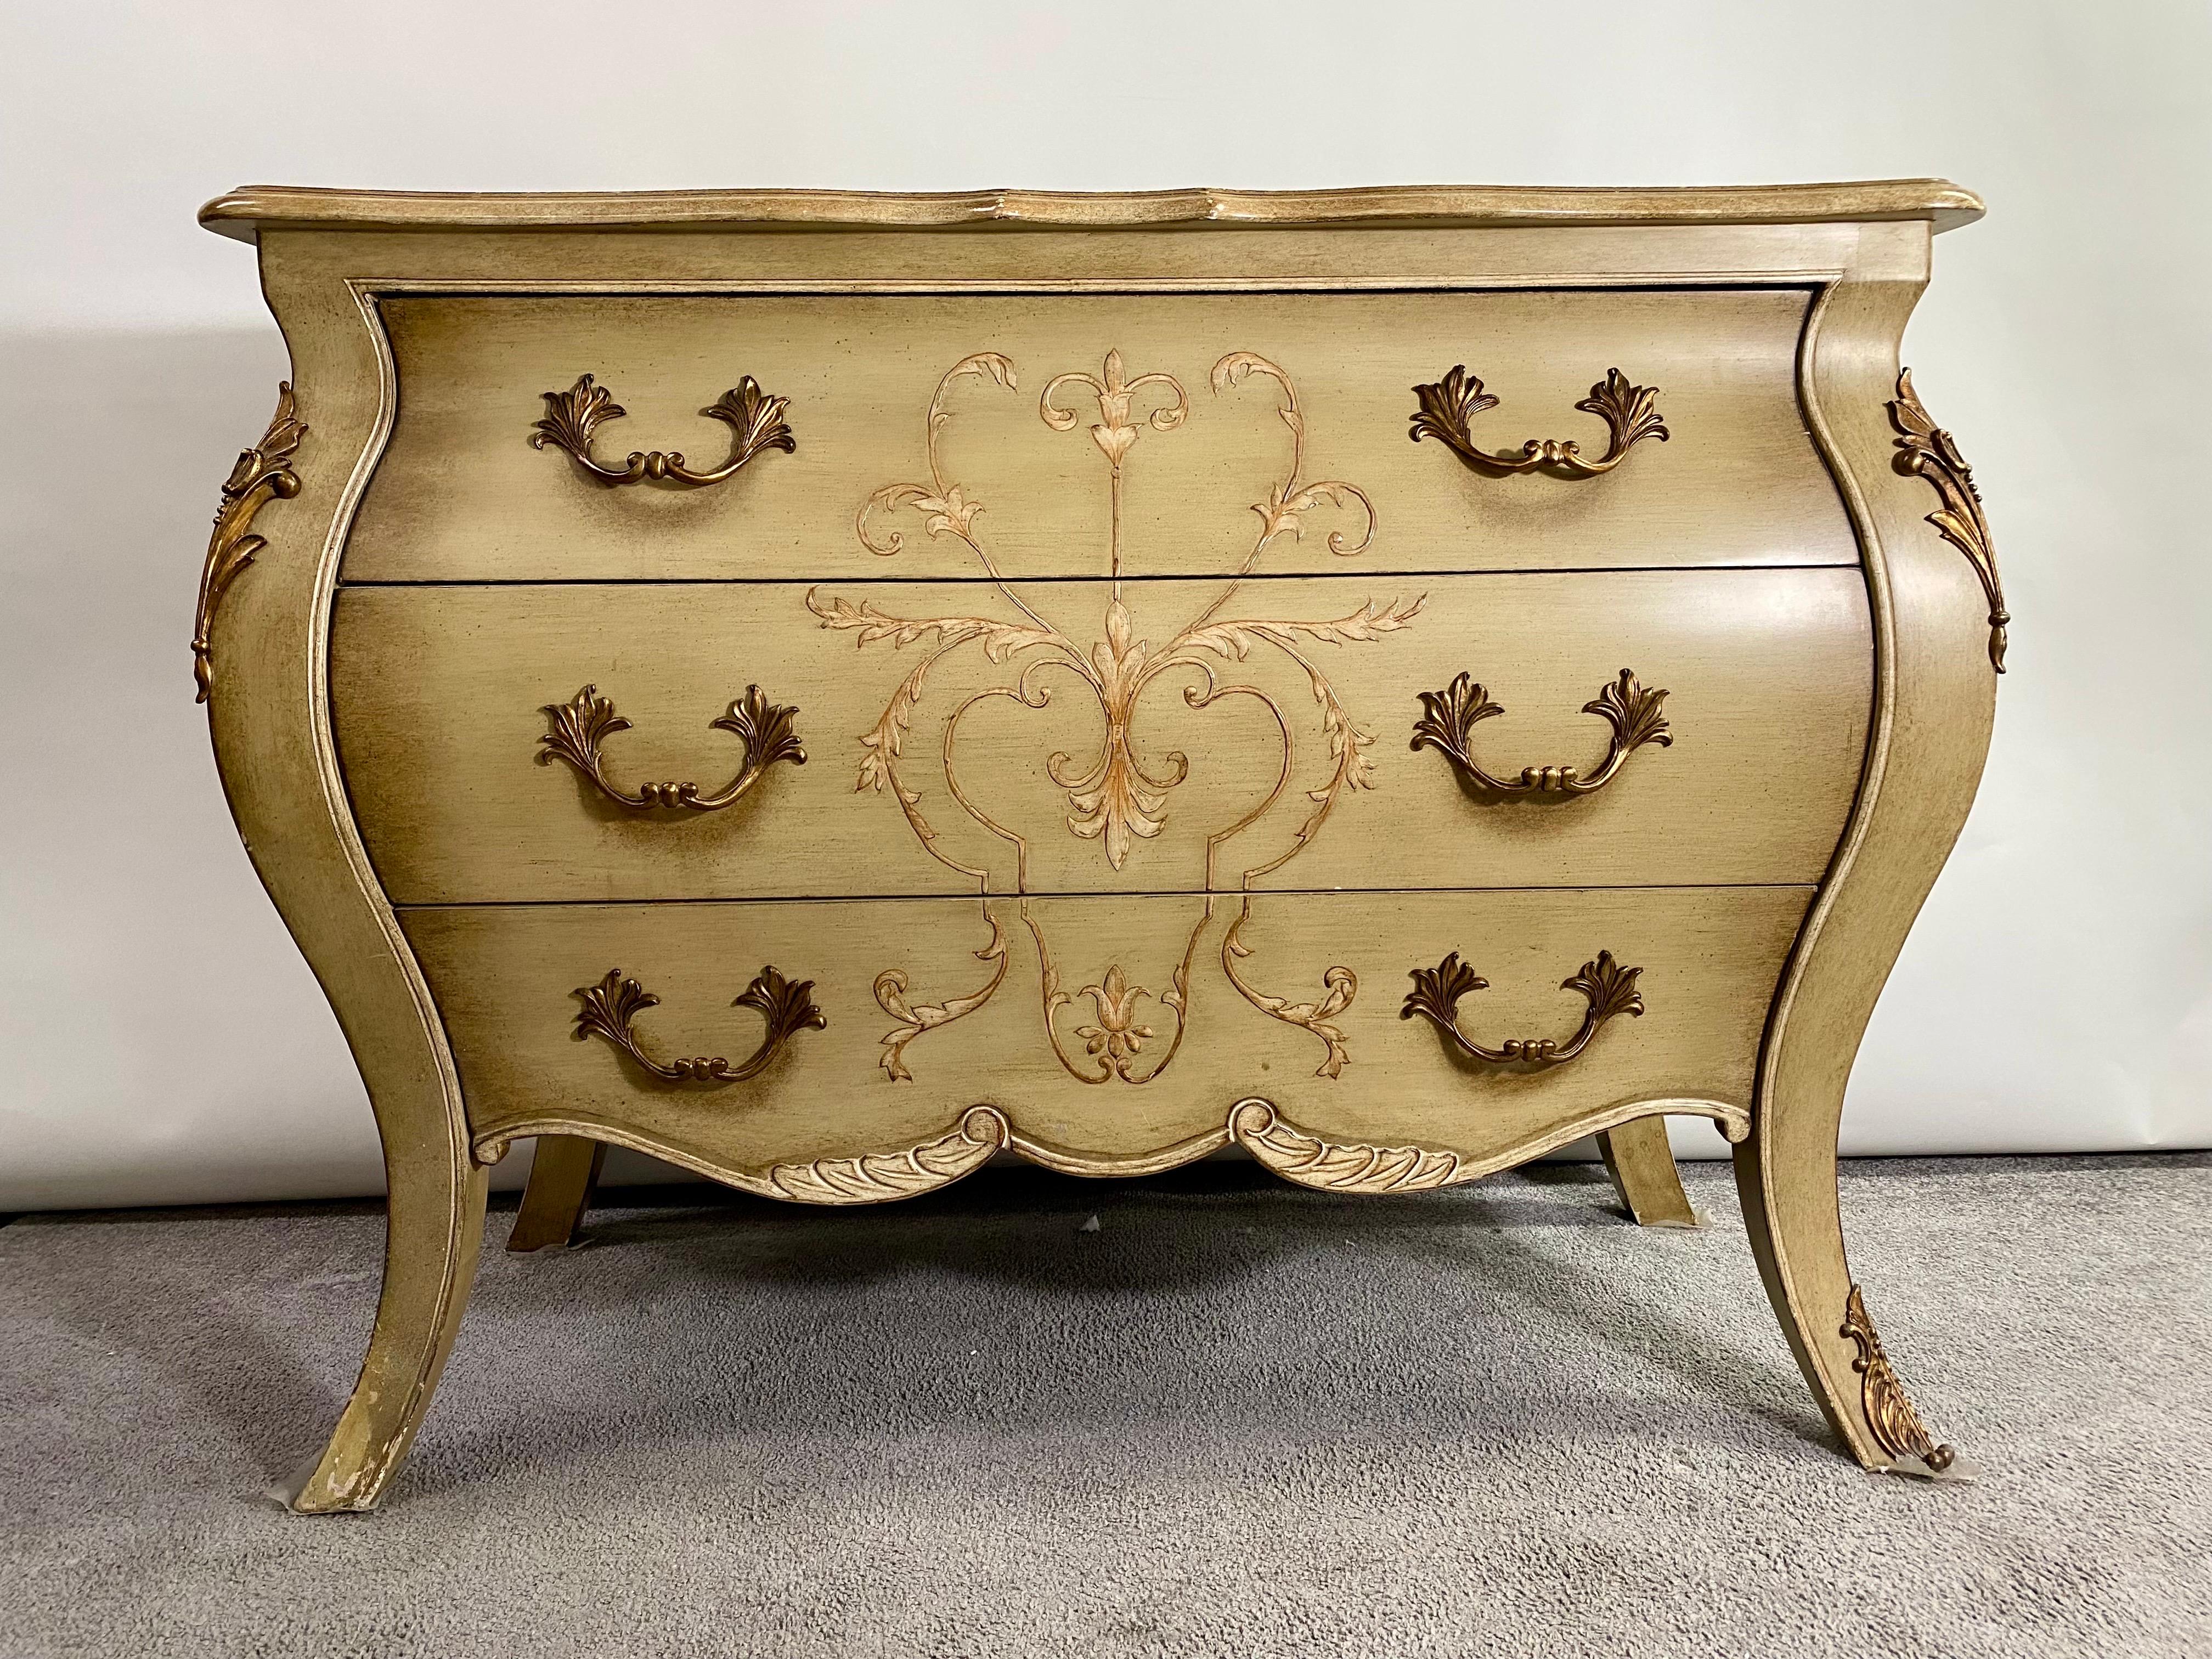 A charming Drexel for Lilian August French Provincial bombe style chest or commode. The commode is beautifully hand-painted over beige antiqued color and features three drawers. The chest is finely decorated with cast bronze mounts on the side and